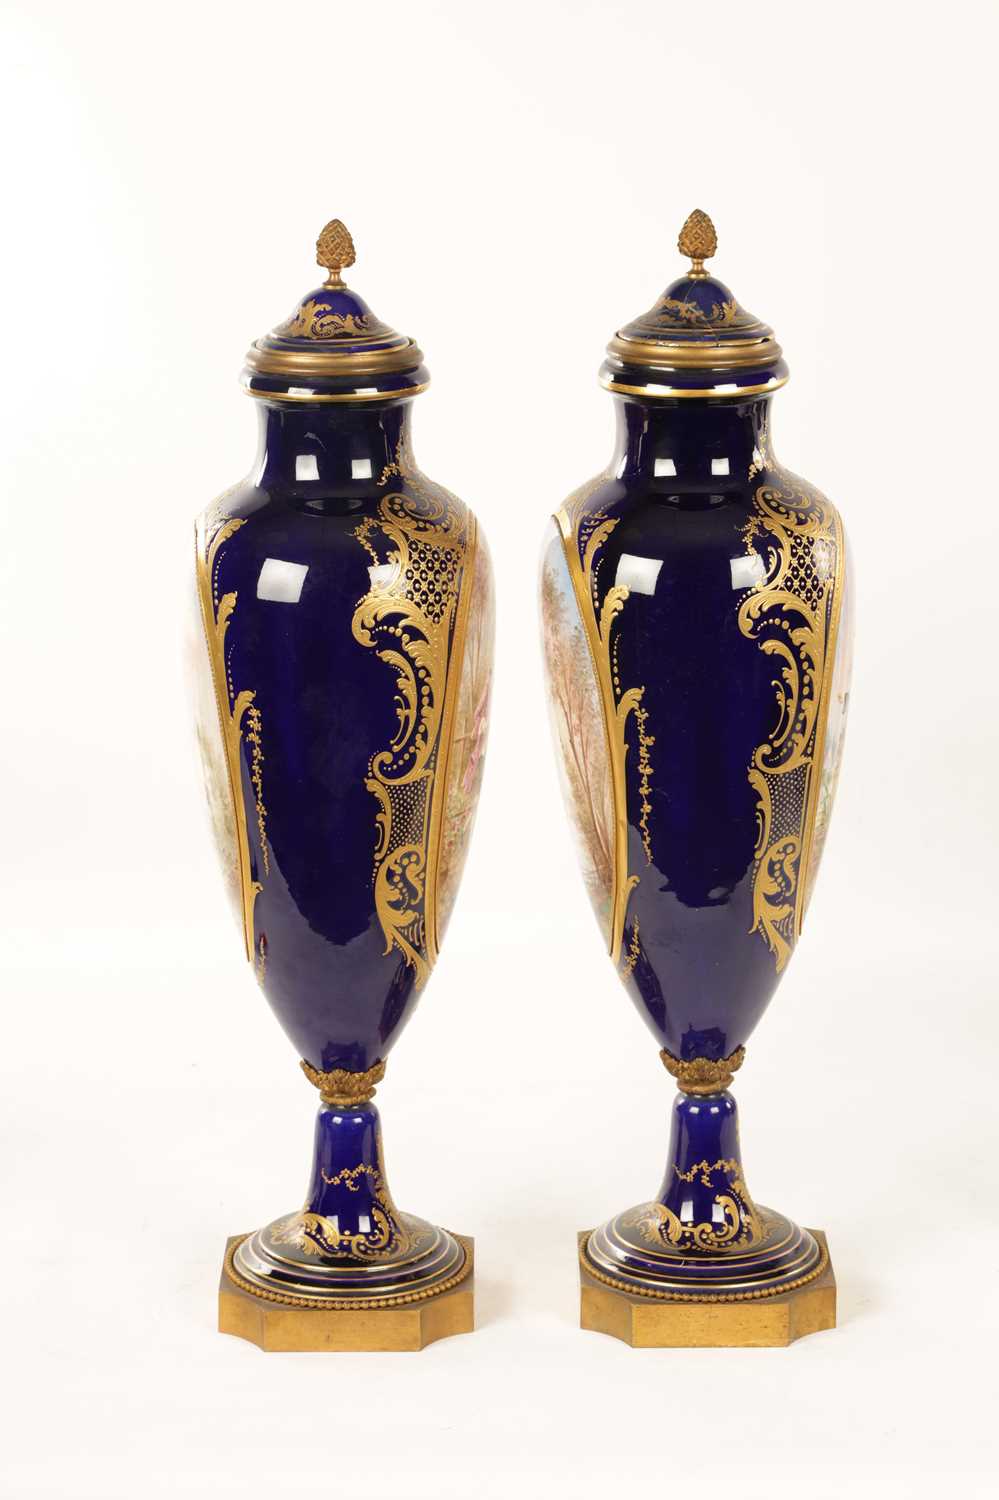 A PAIR OF LATE 19TH-CENTURY SERVES STYLE PORCELAIN LARGE CABINET VASES - Image 10 of 20